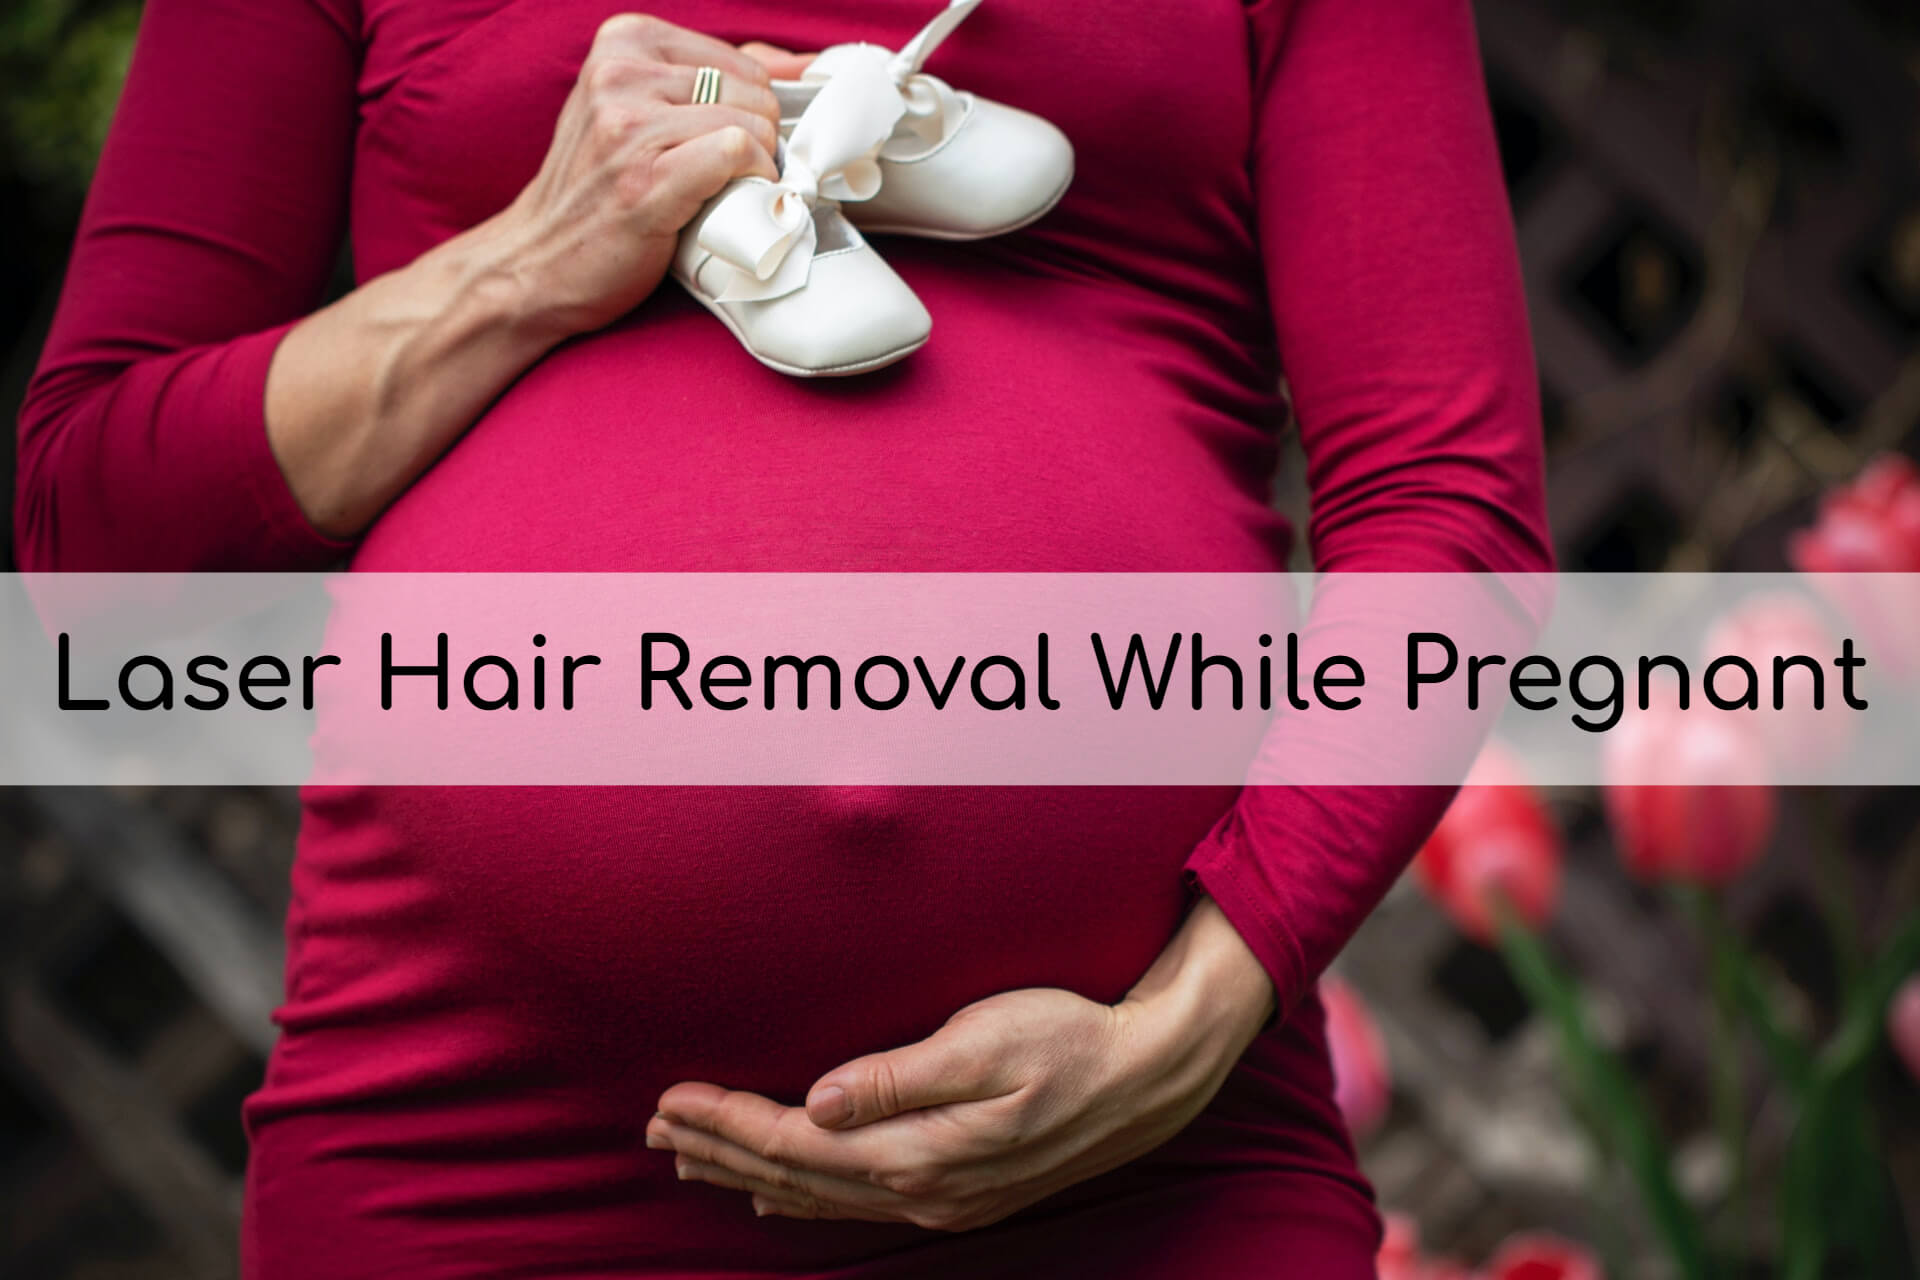 Laser Hair Removal While Pregnant